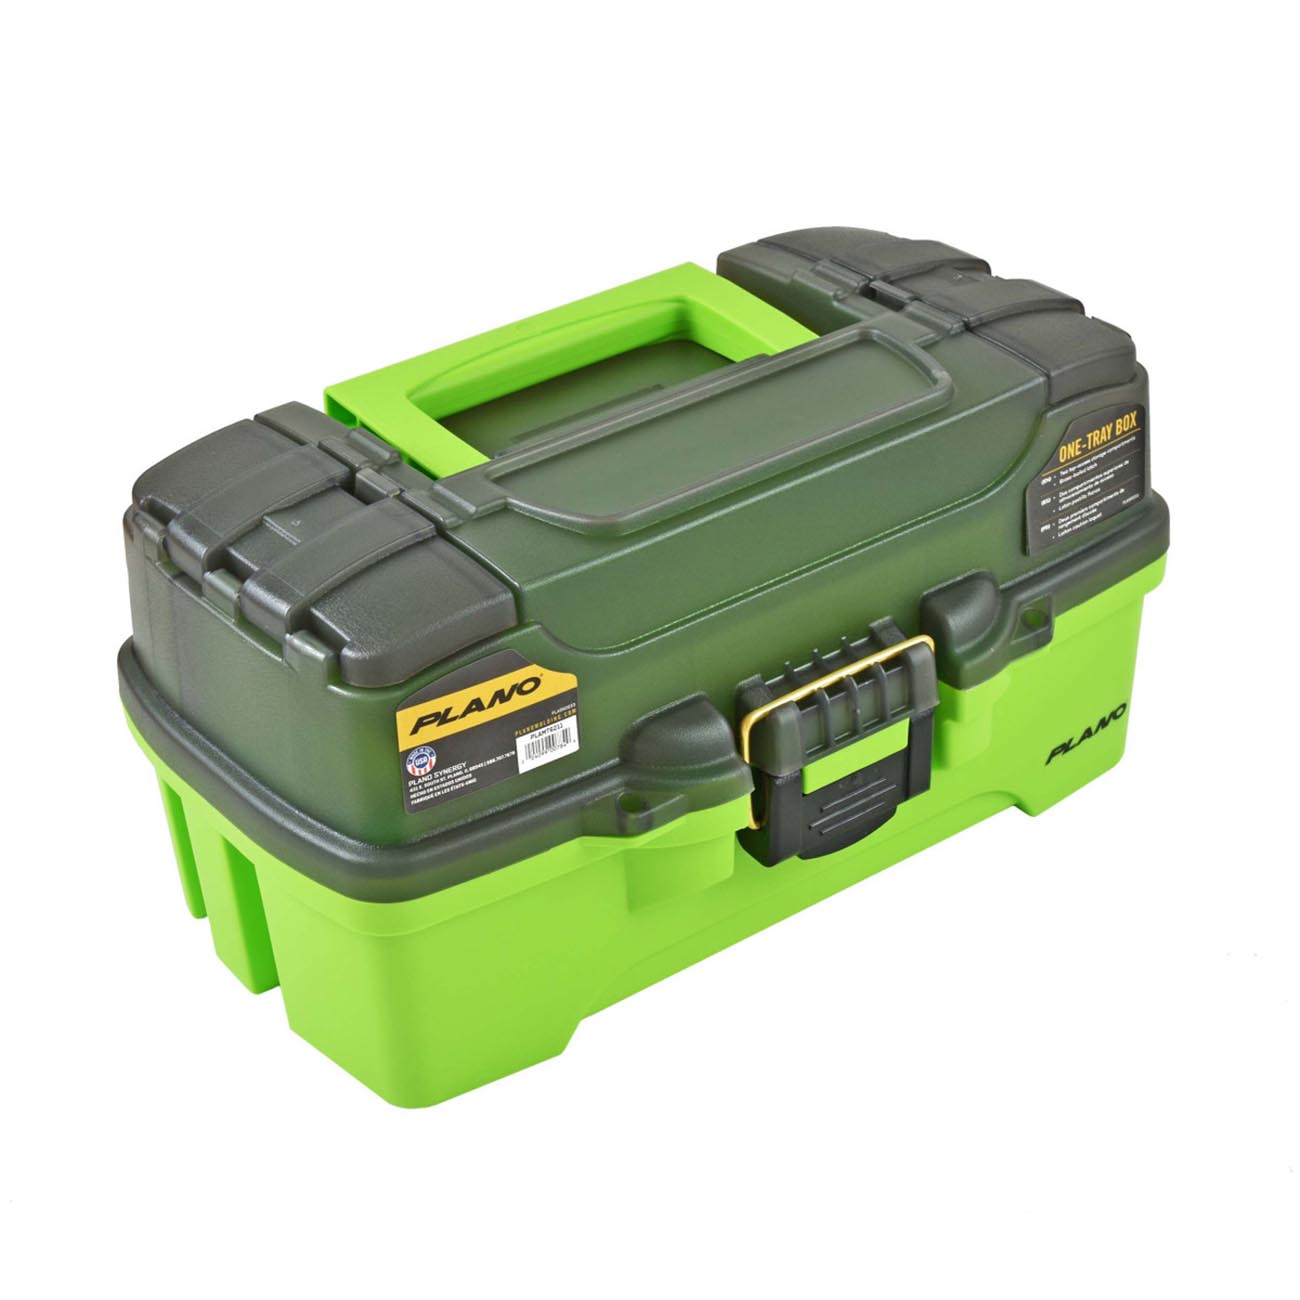 Plano Classic One-Tray Tackle Box - Green